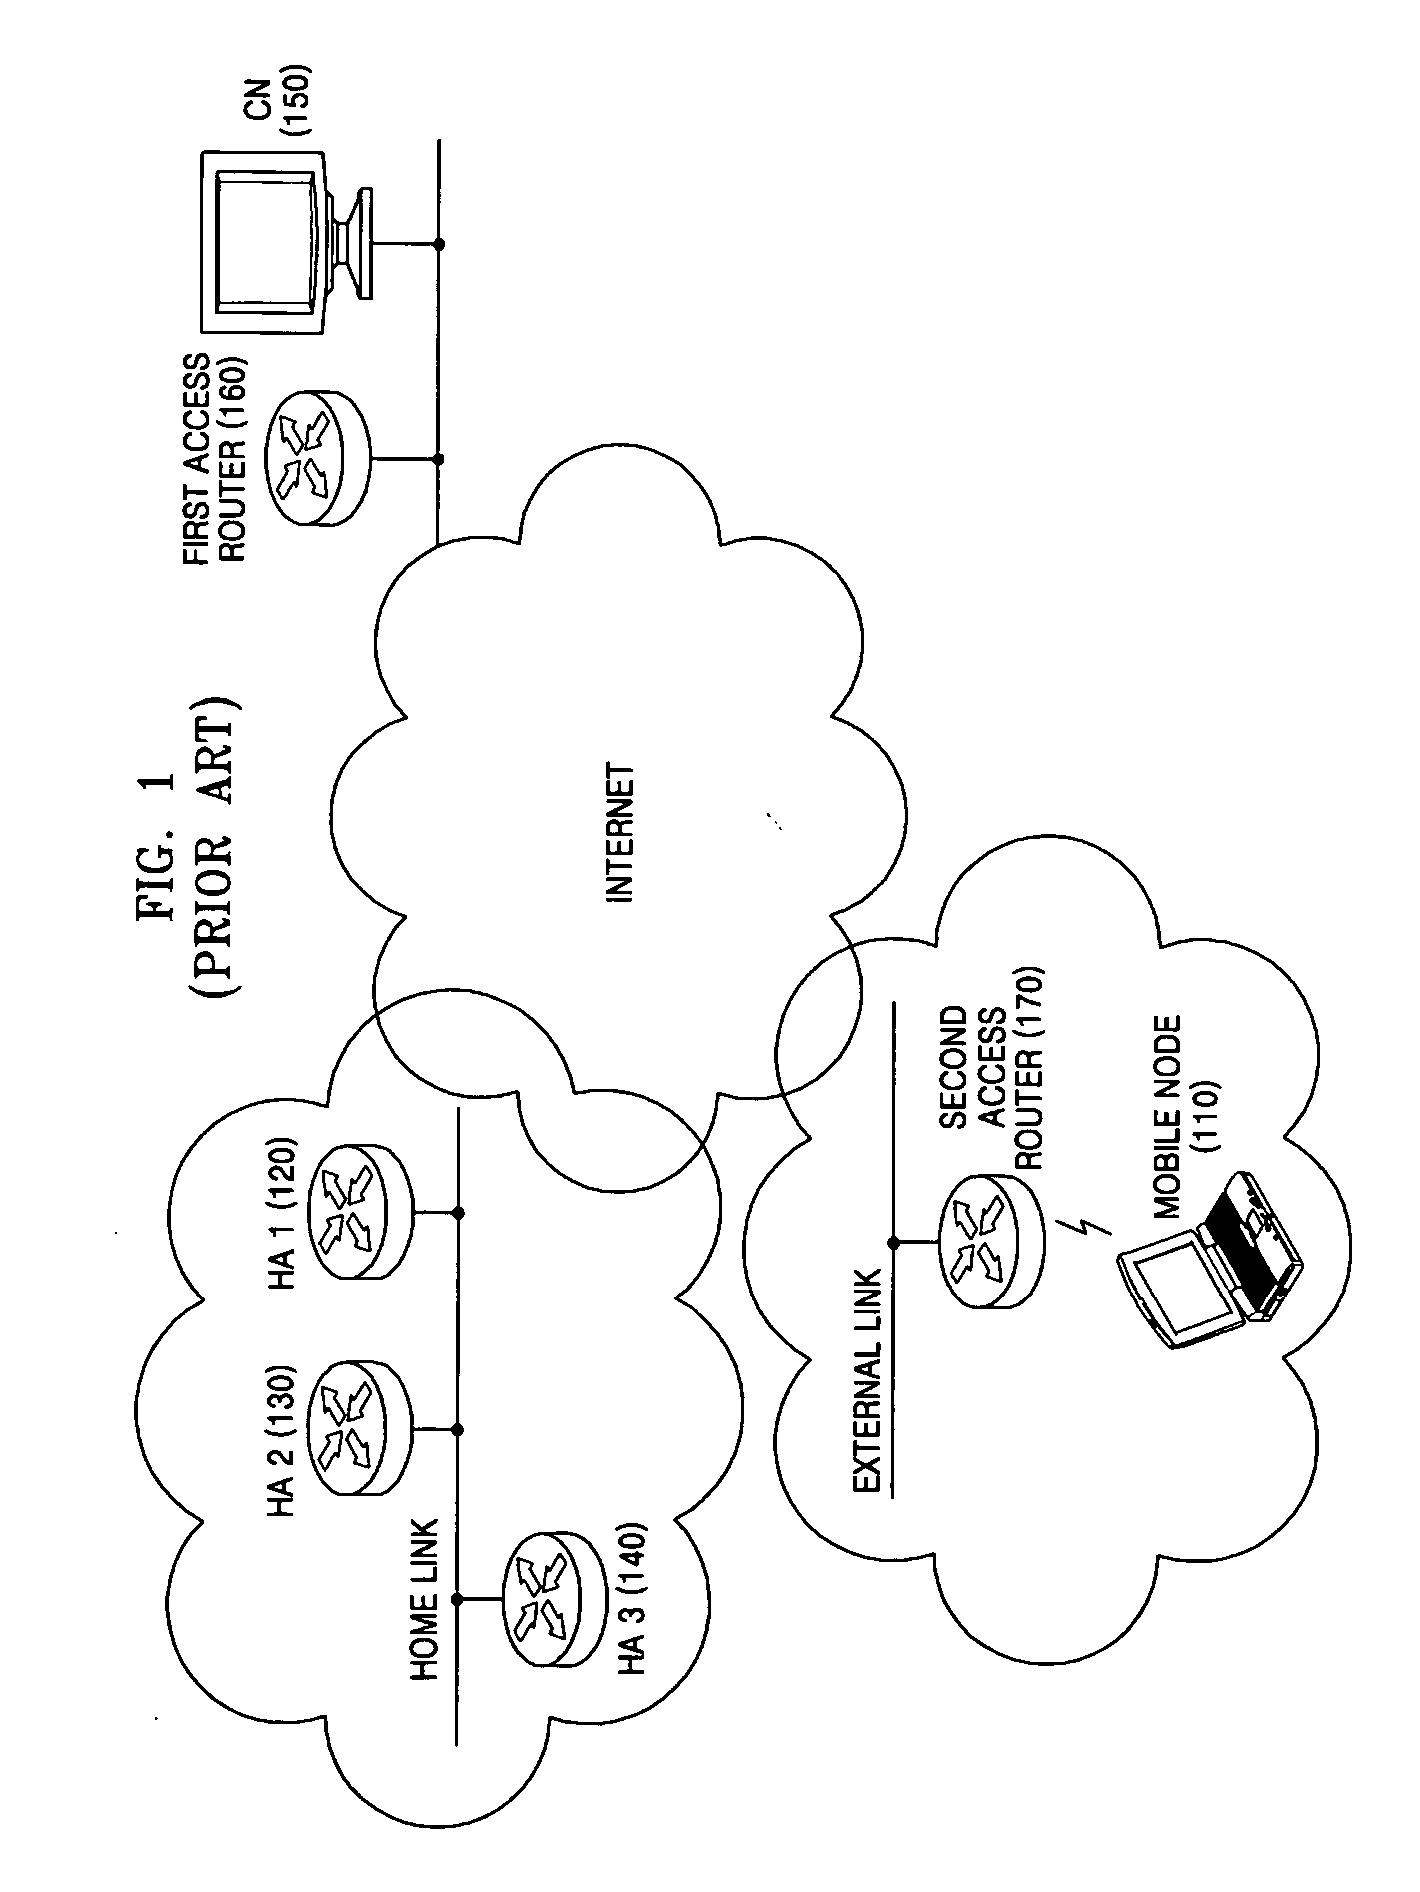 Multi-home agent control apparatus and method